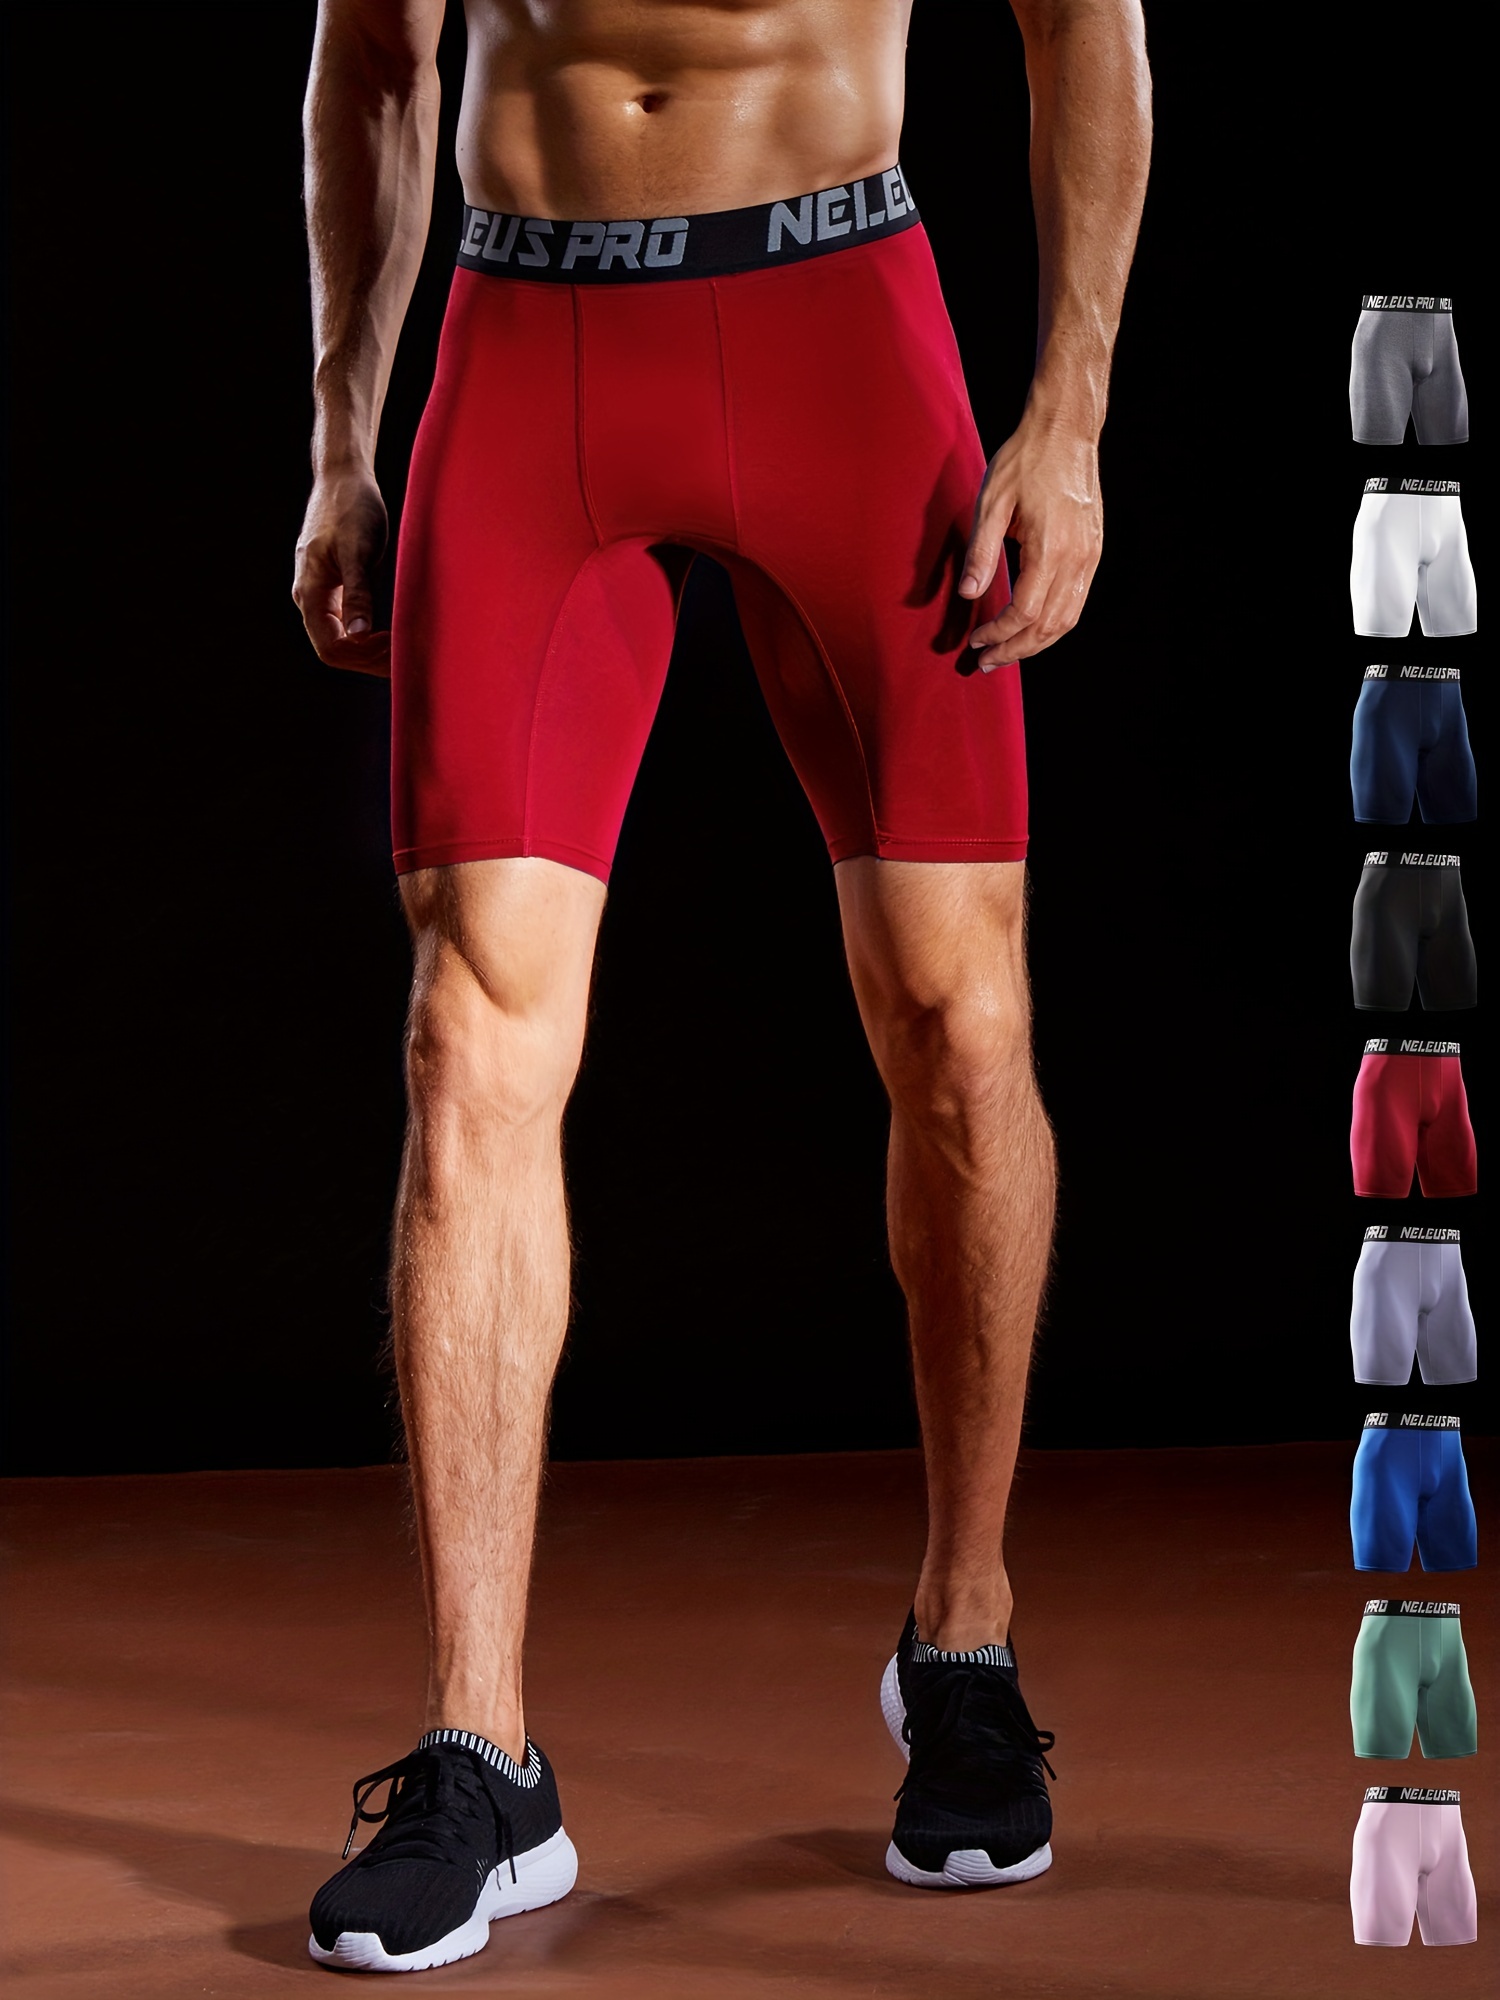 Compression Shorts Men - Welcome to AliExpress to buy high quality